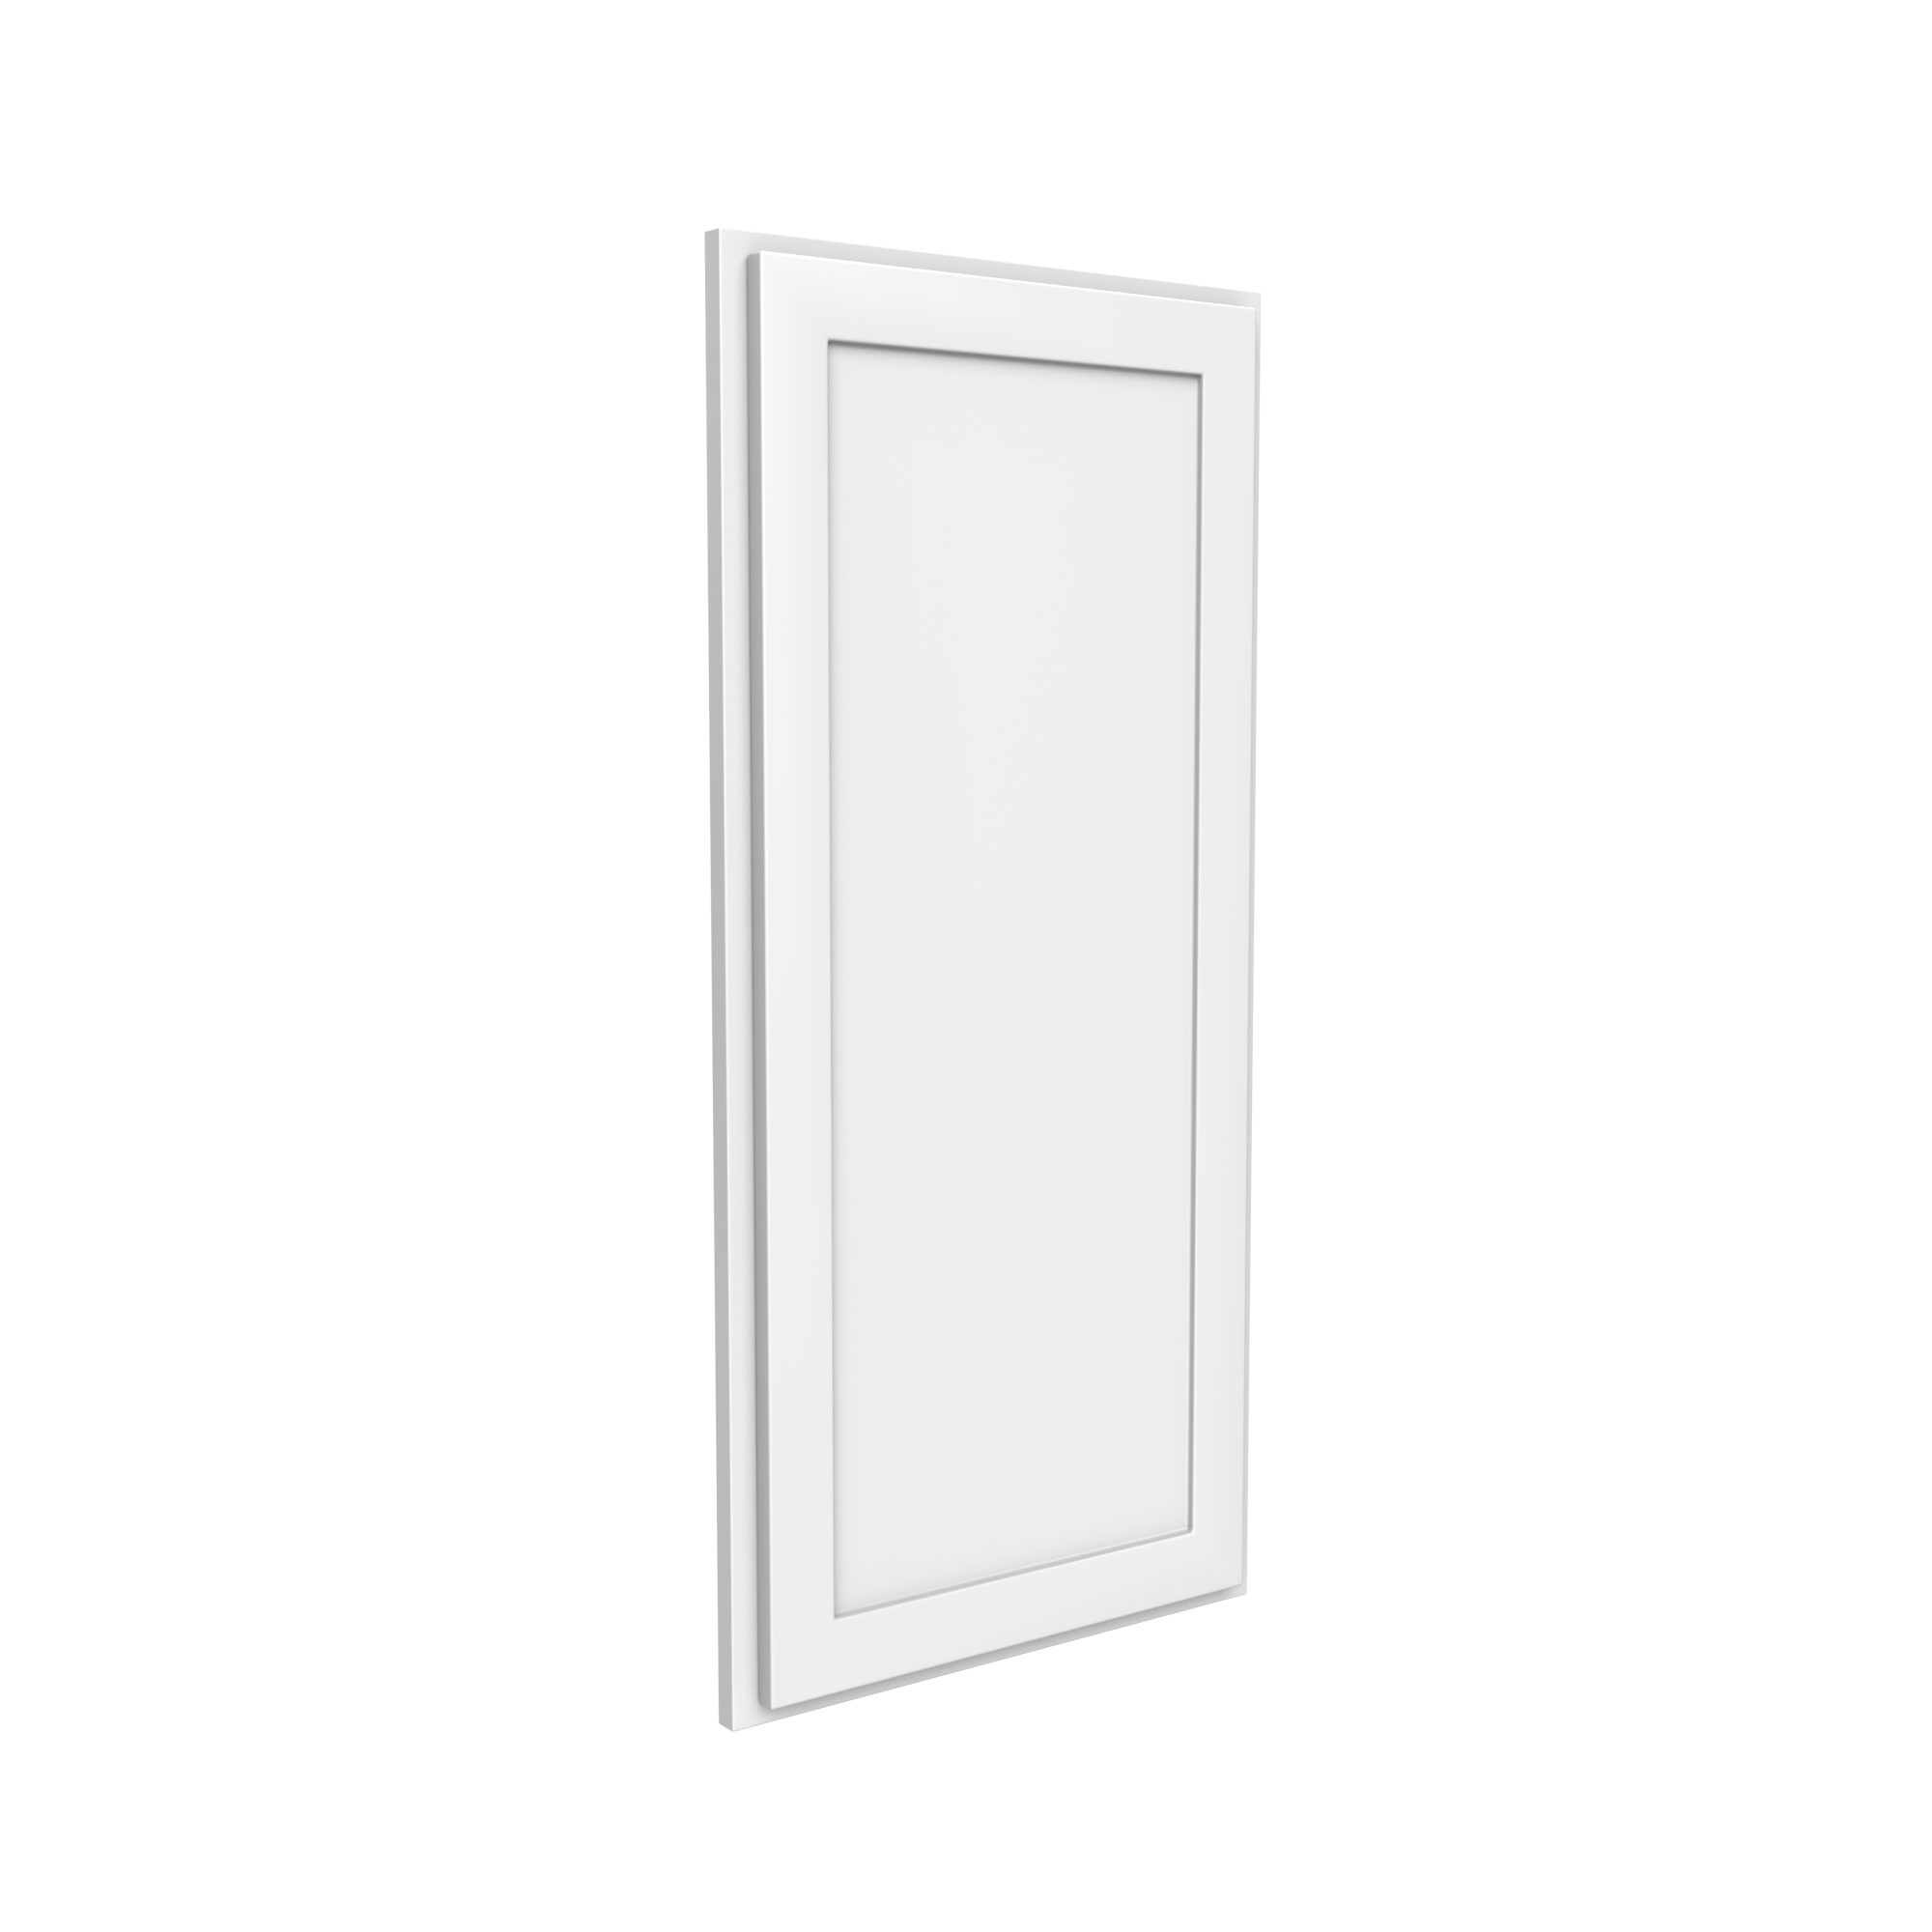 Angle Wall Cabinet - 12W x 36H x 12D - Aria White Shaker